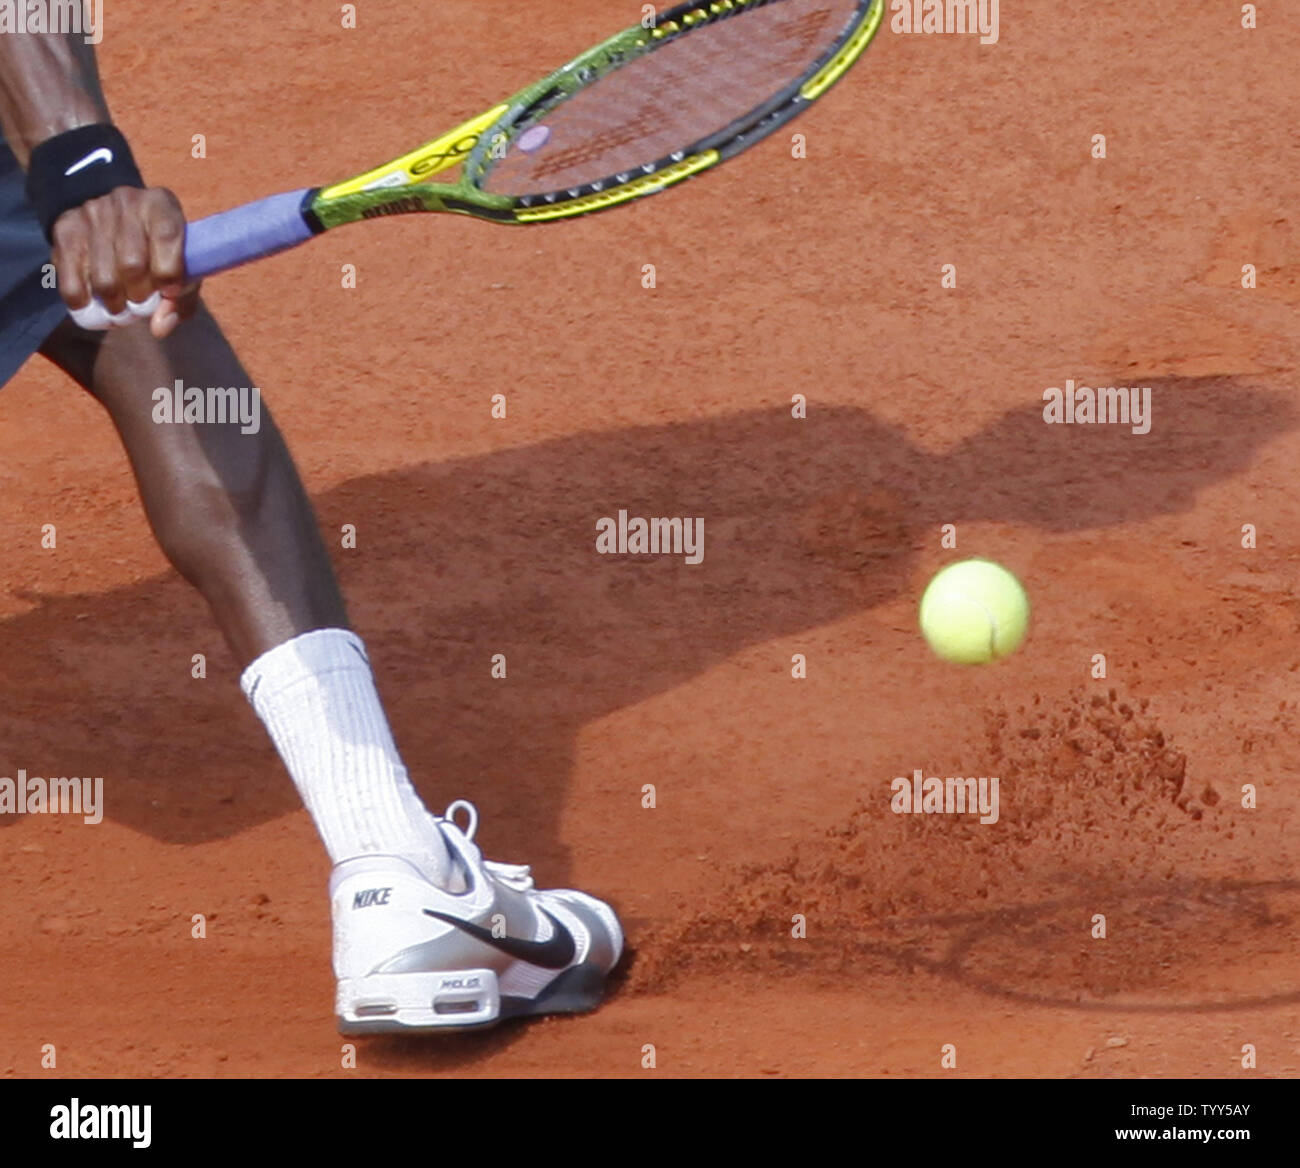 Clay is seen shooting from the foot of Frenchman Gael Monfils as he slides  during his French Open quarterfinal match against Roger Federer of  Switzerland at Roland Garros in Paris on June